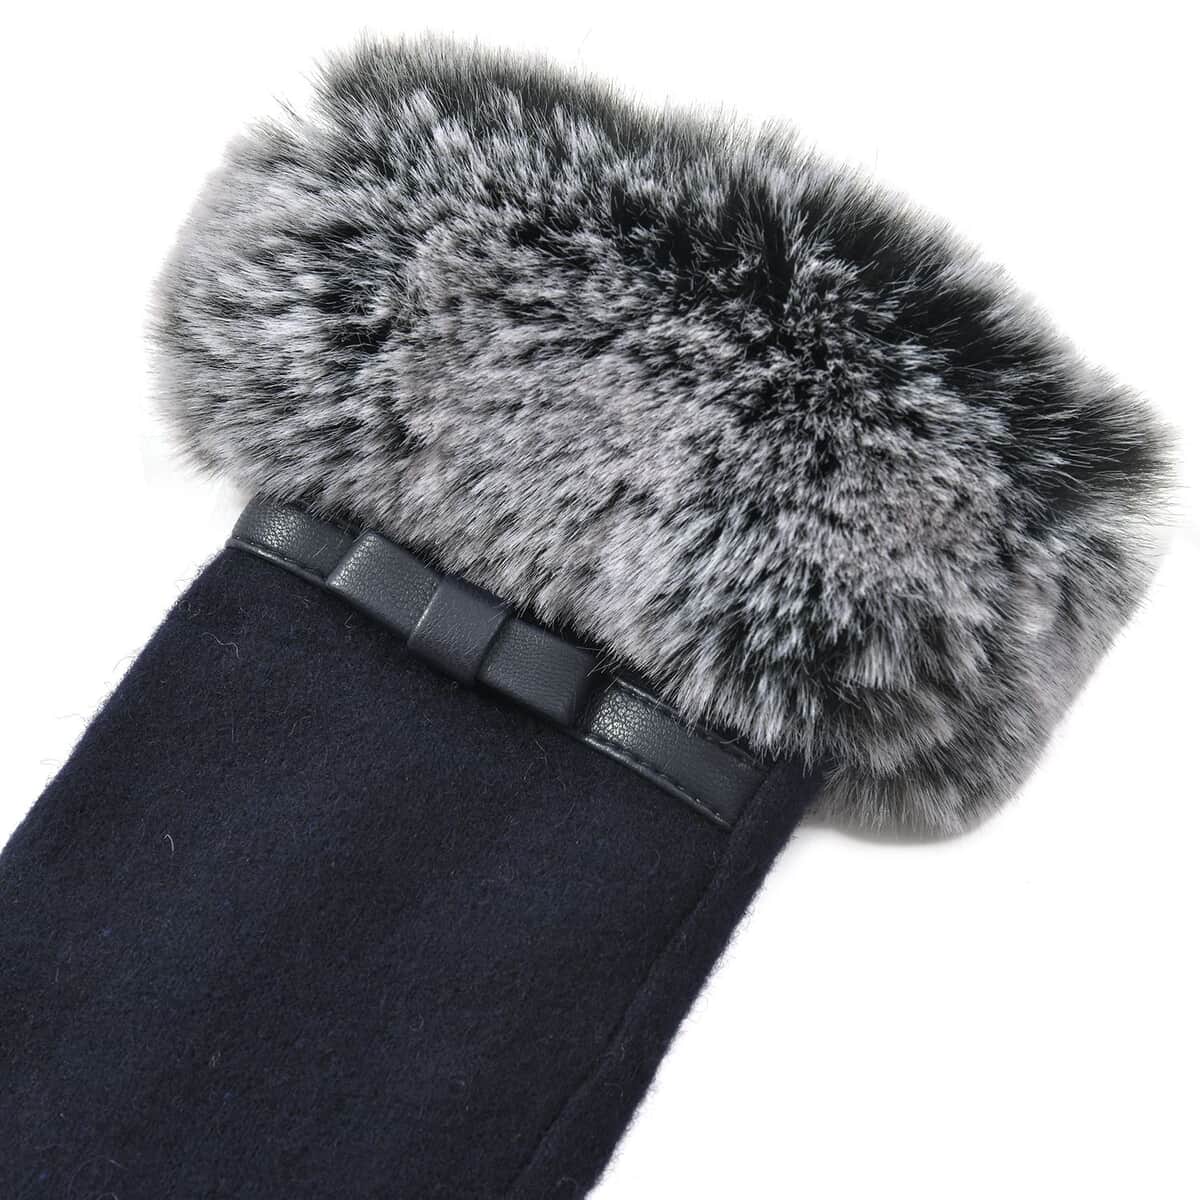 Navy cashmere gloves with faux fur with Touch screen function (9.05"x3.54") image number 5